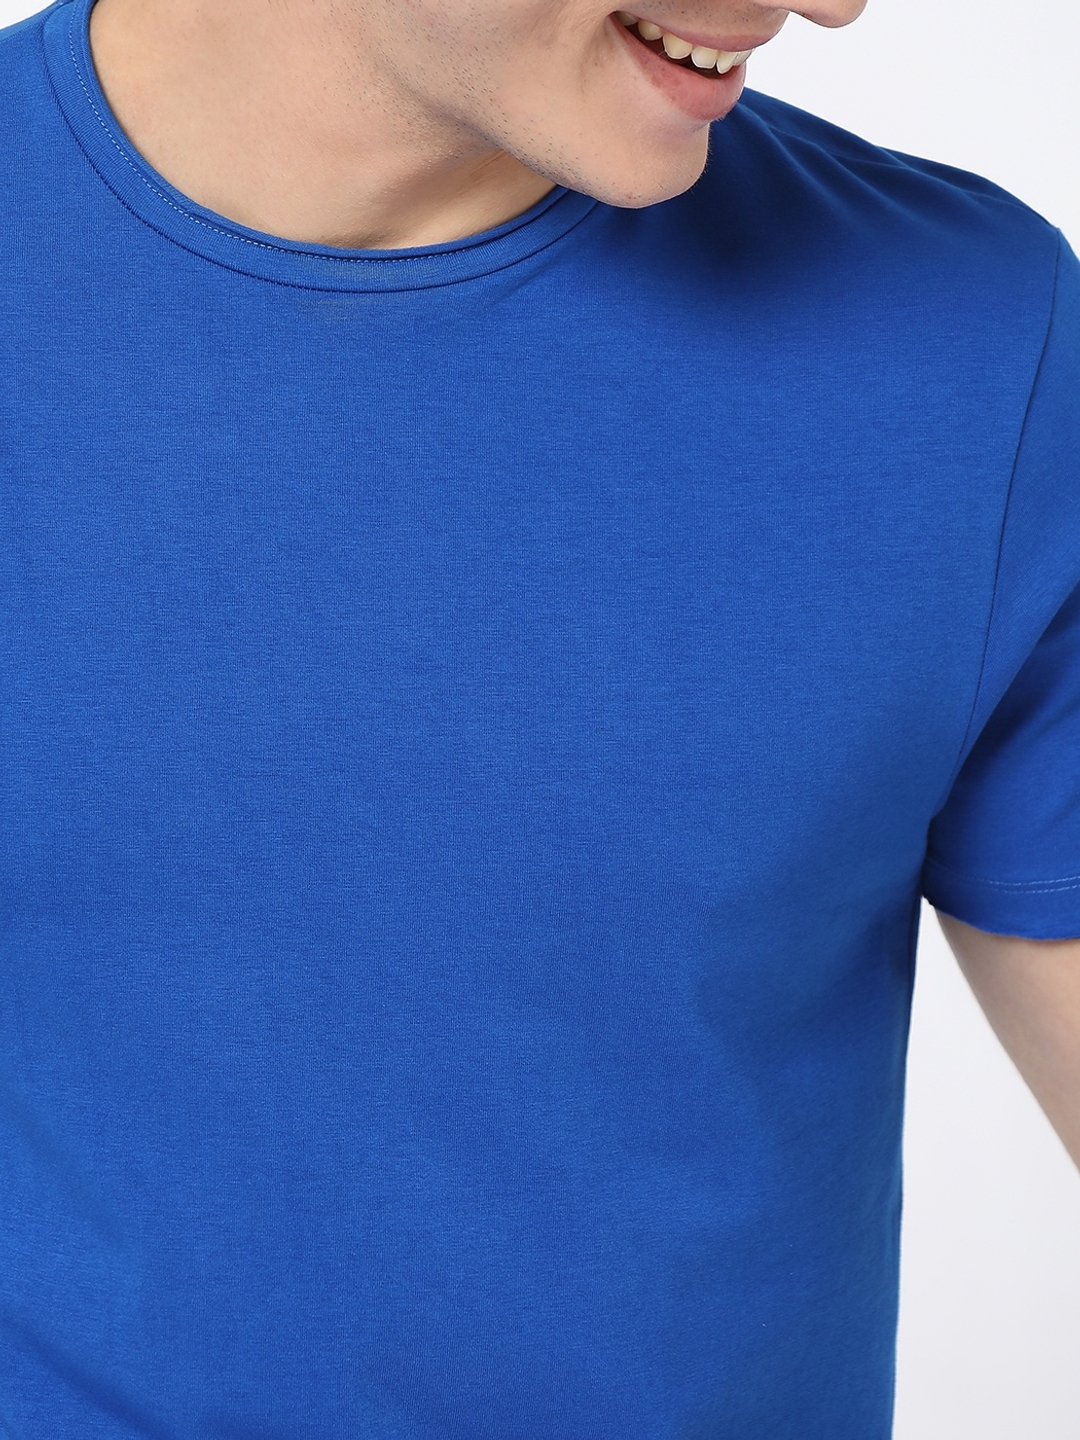 BECLOH Men's Active Quick Dry Crew Neck T Shirts only $4.99